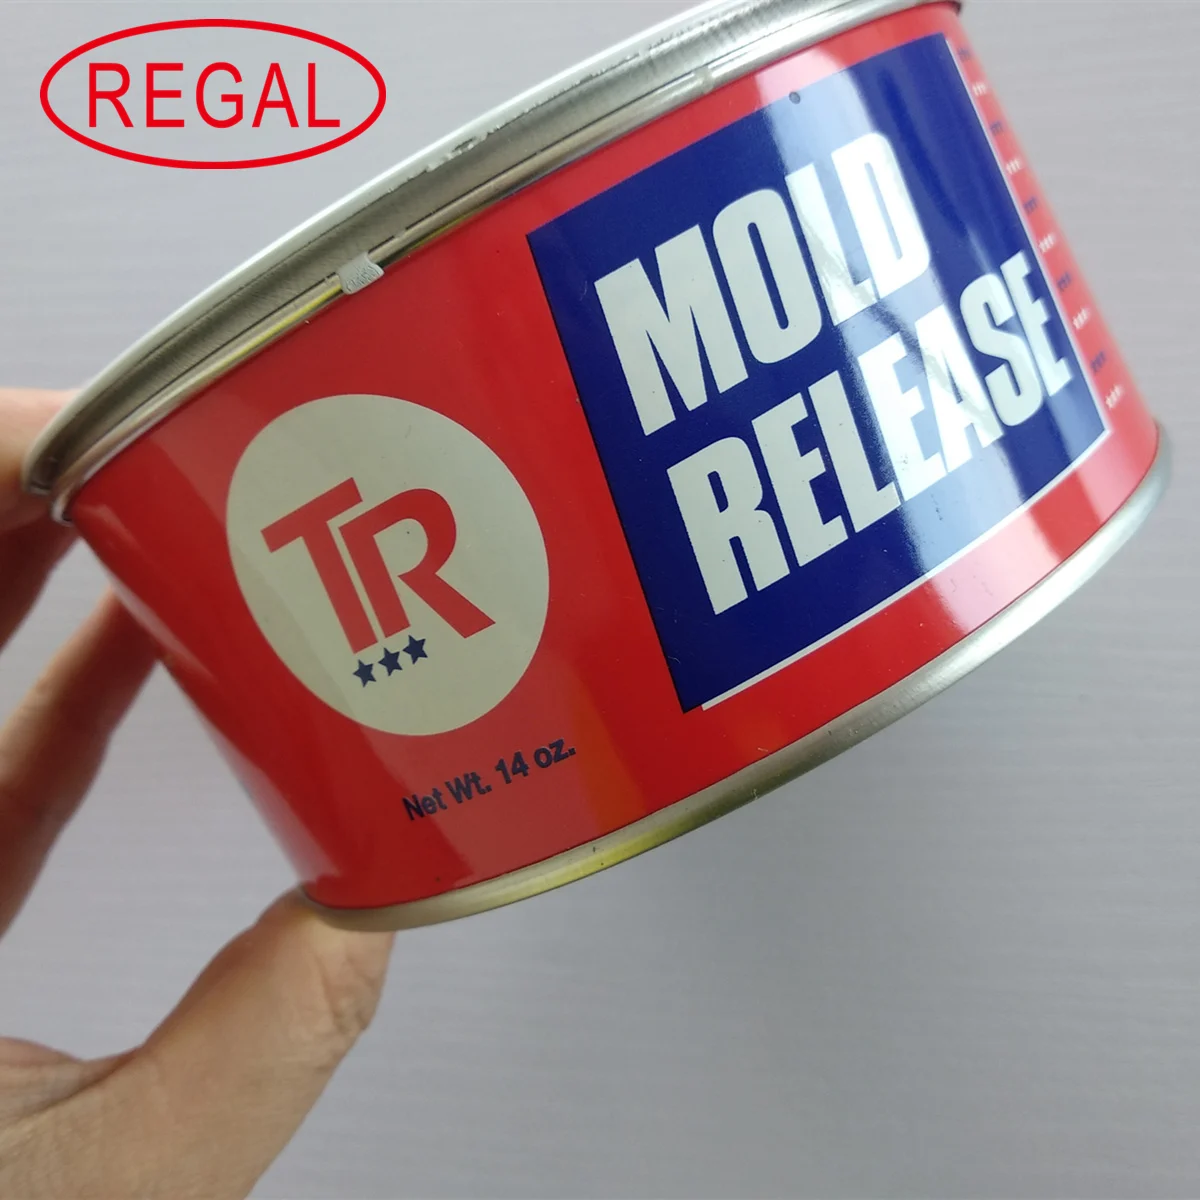 TR Mold Release (14 oz. can)